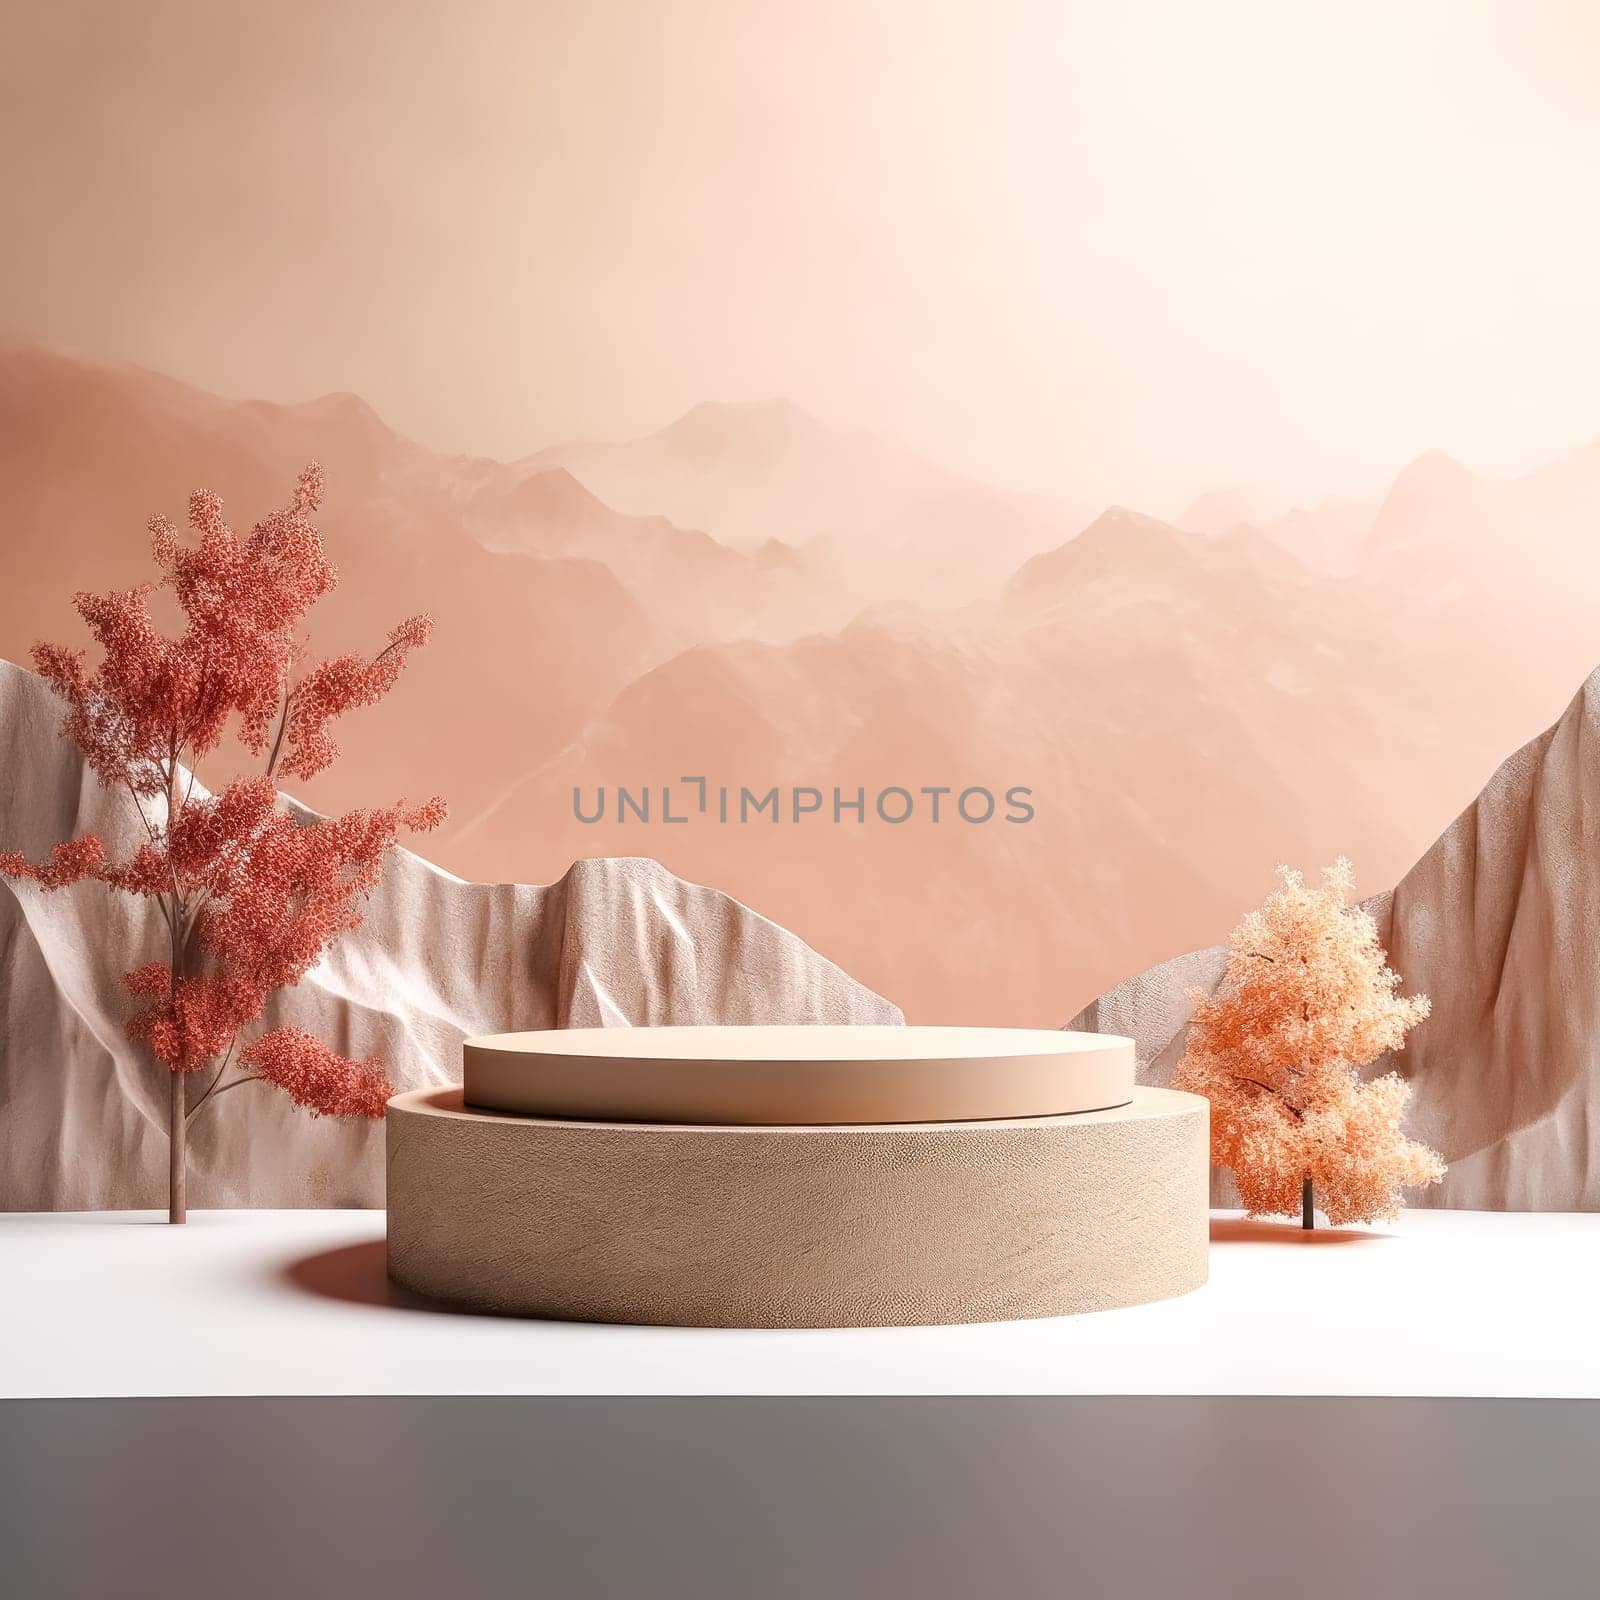 A model of a mountain scene with a tree and a stone pedestal. The scene is set in a warm, orange-toned room with a mountain backdrop